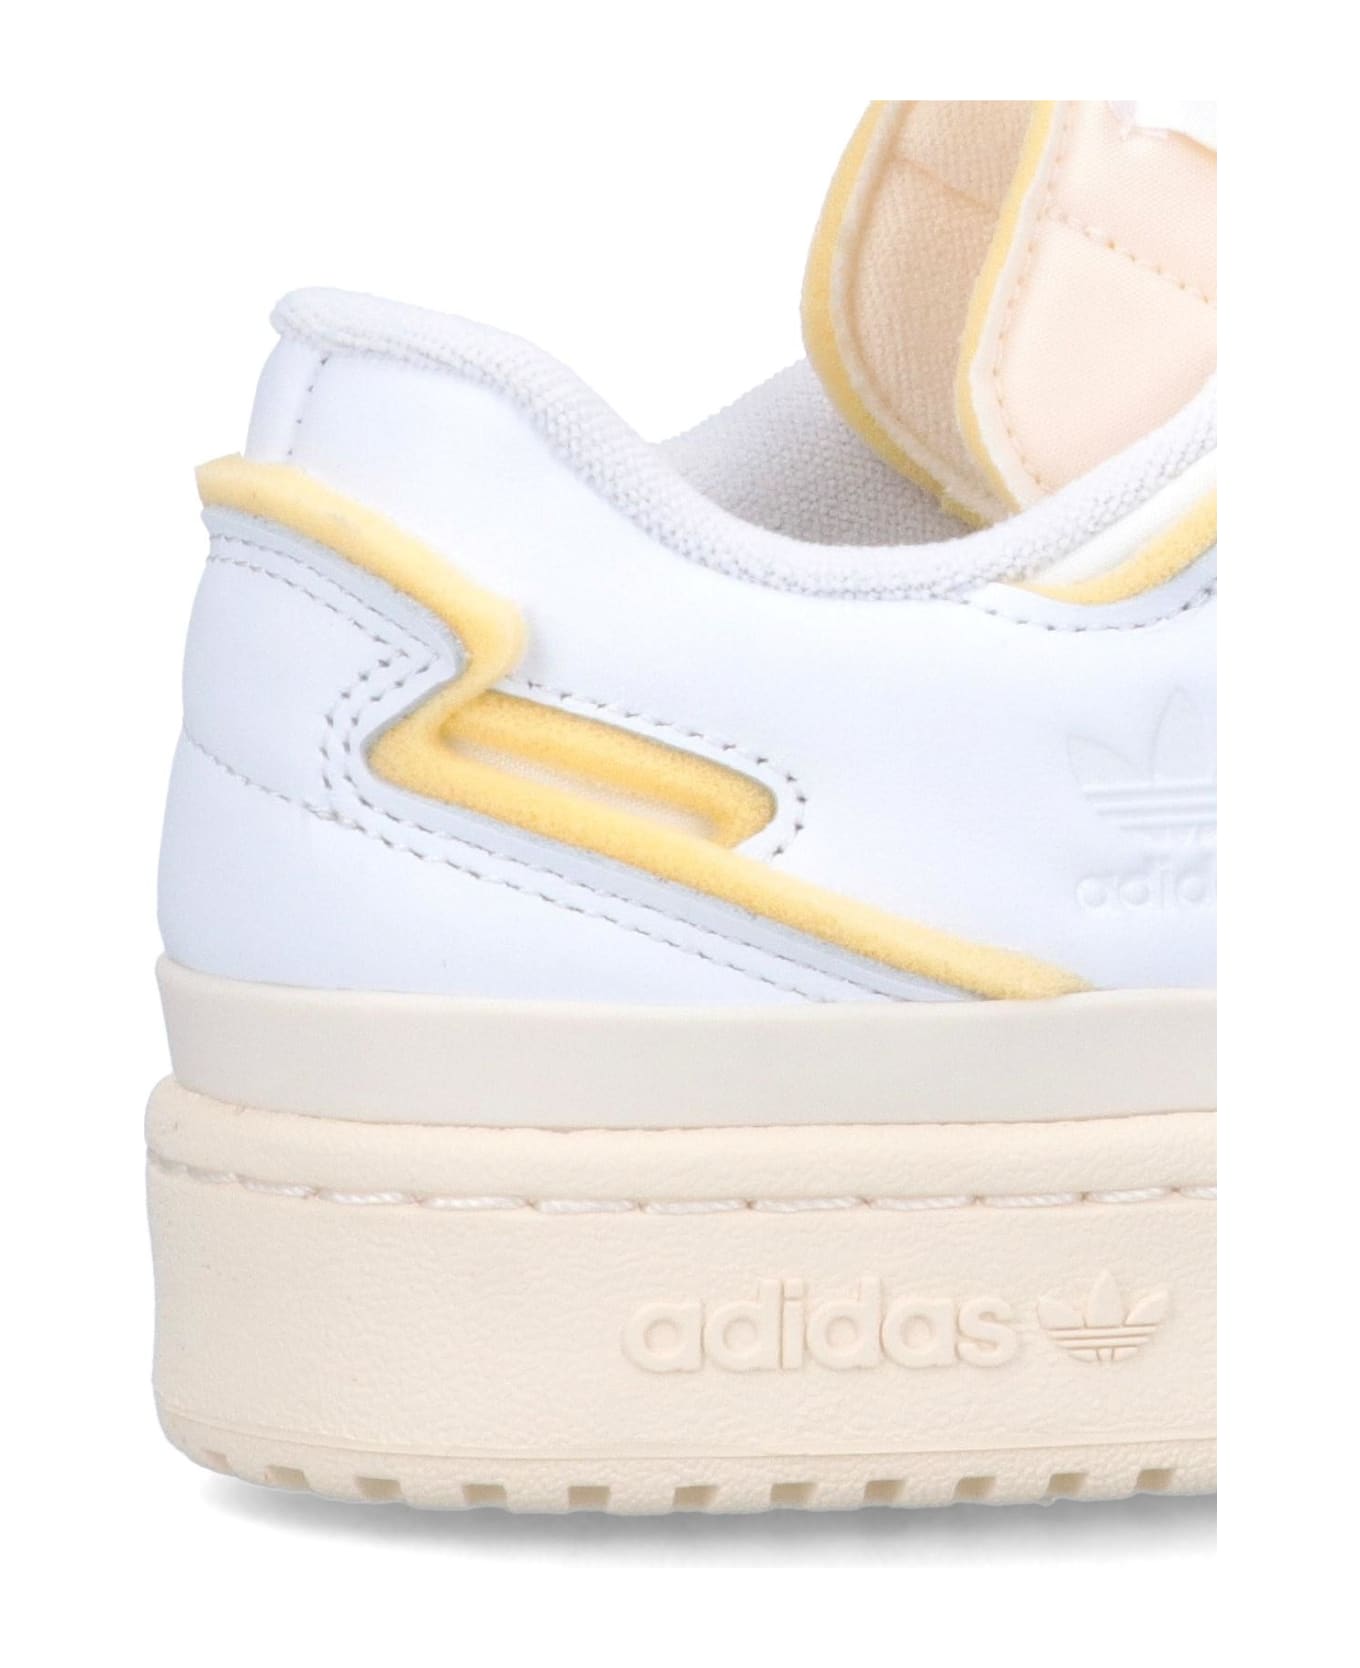 Adidas 'forum 84 Low' Sneakers - Ftwwht/ftwwht/owhite